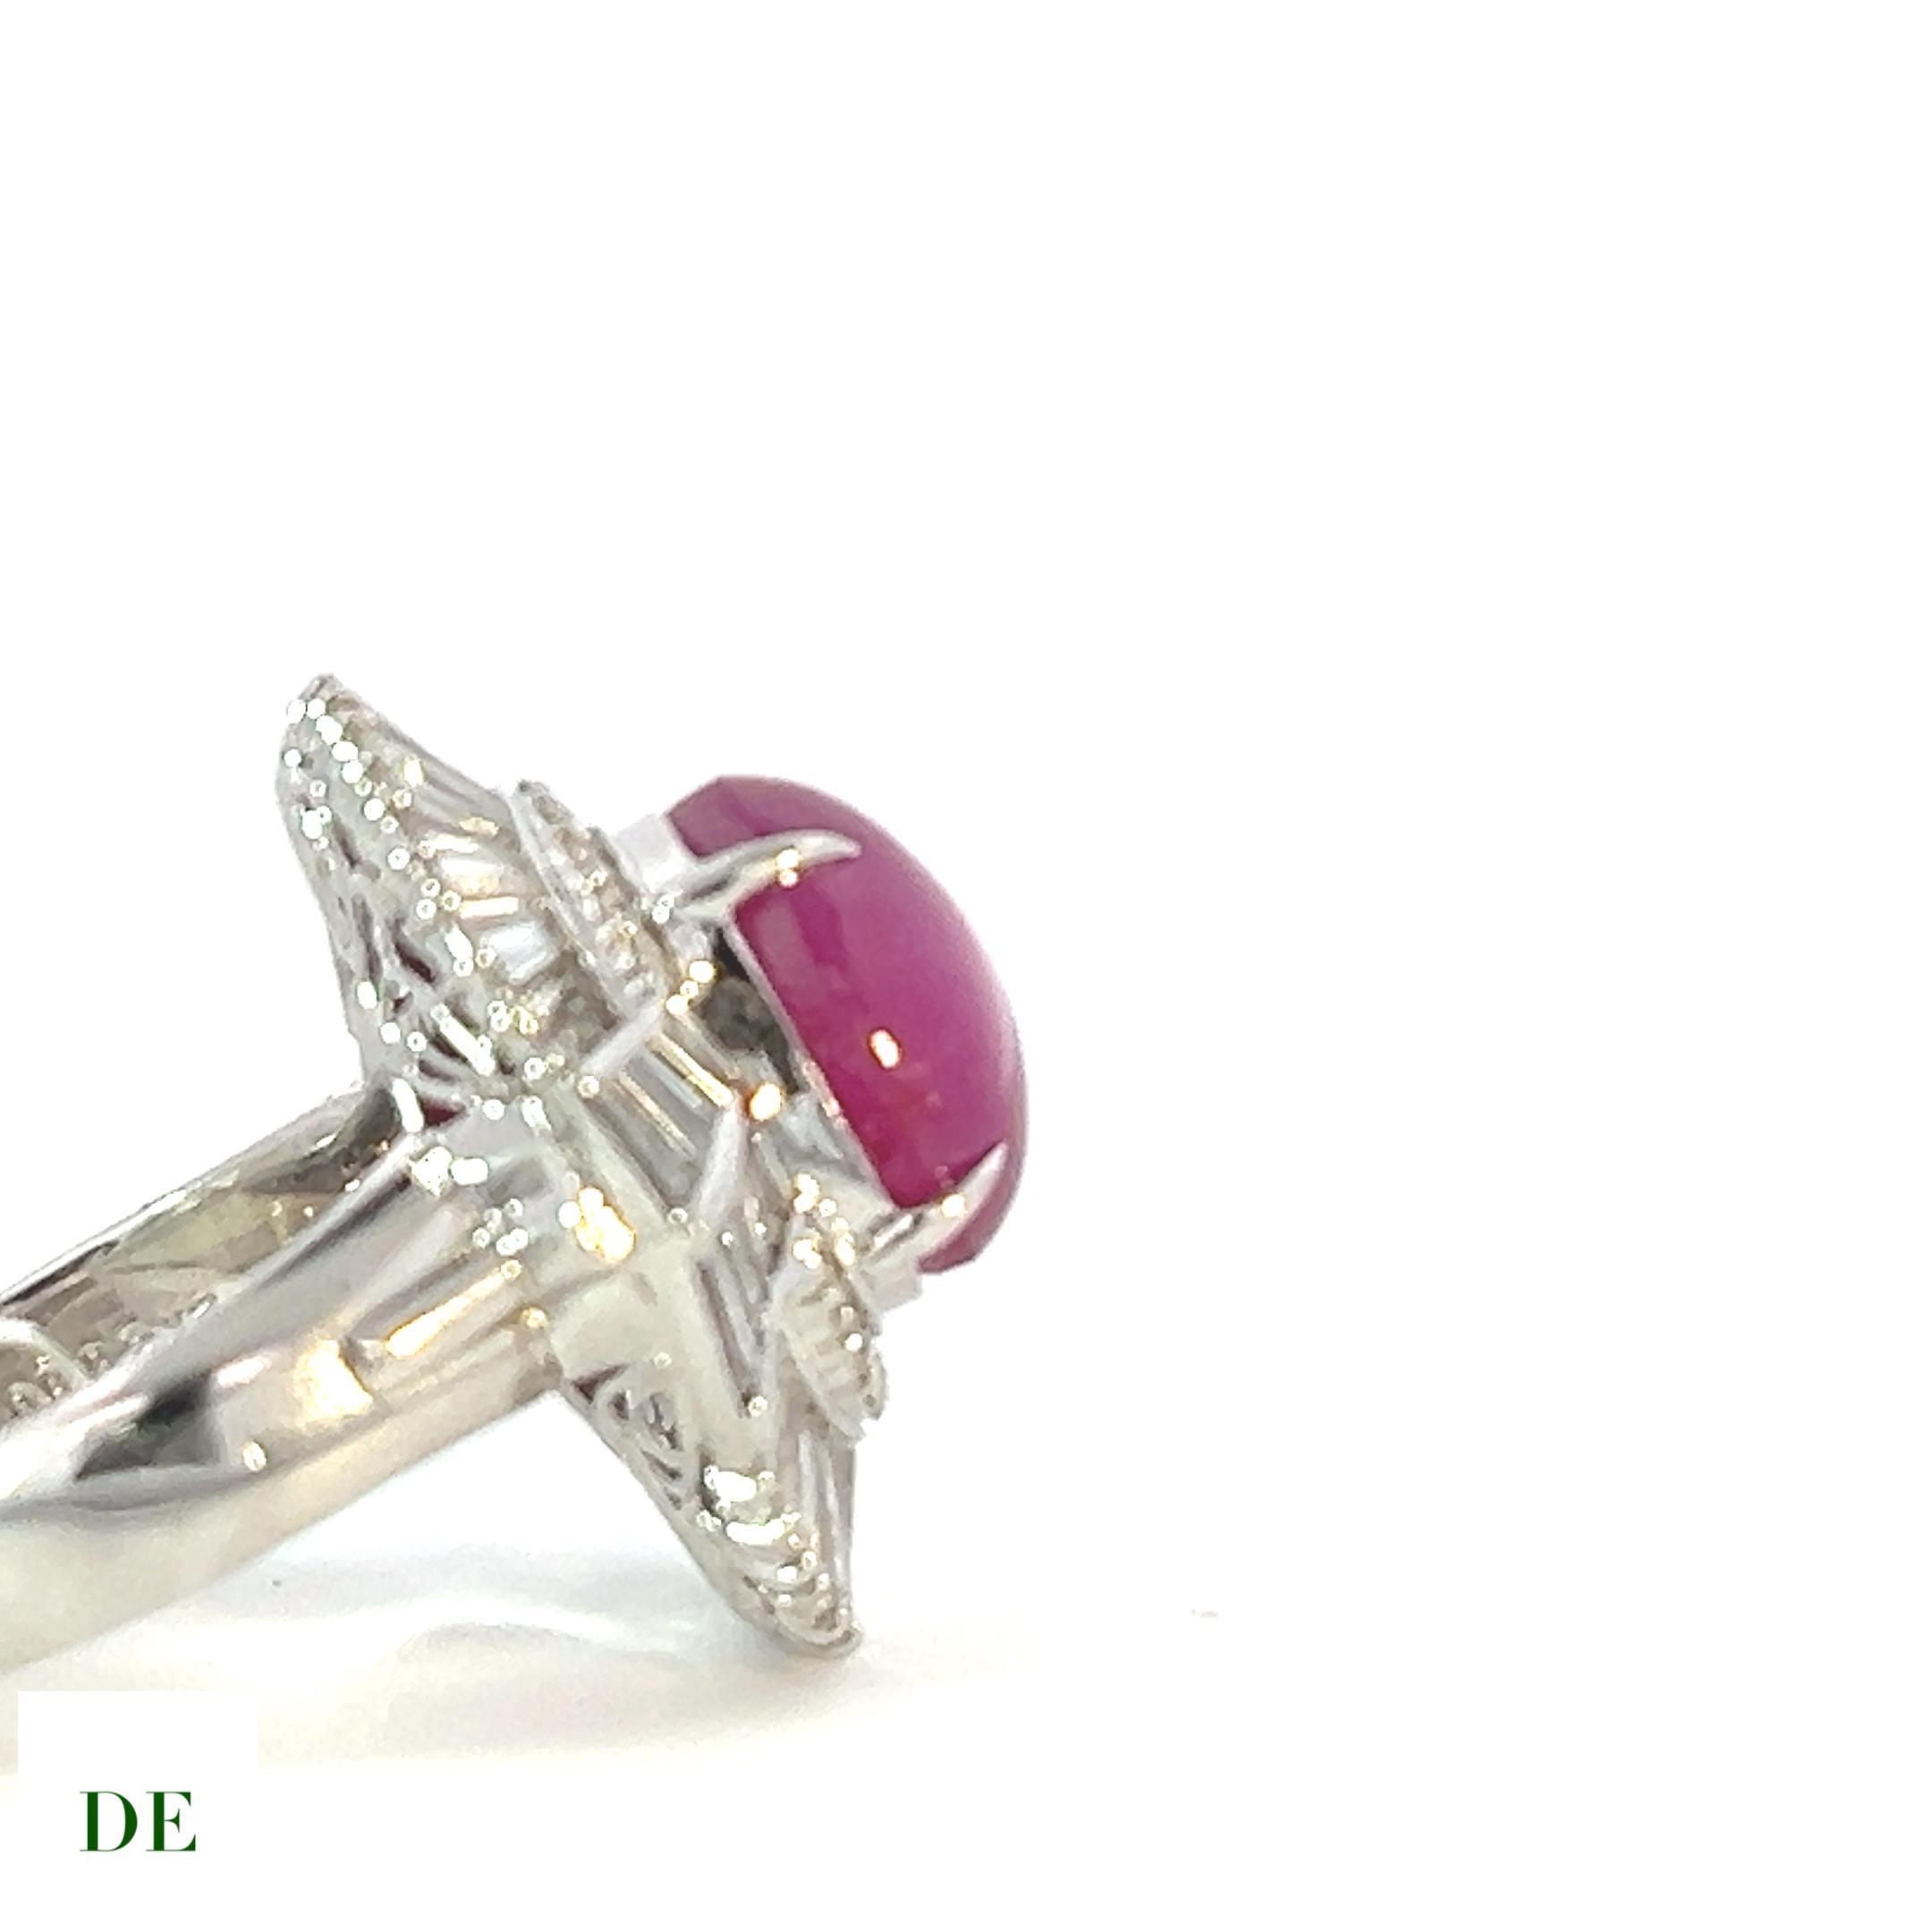 Extremely Rare Platinum 9.05 Ct Natural Star Ruby 2.17 ct Diamond Statement Ring

Introducing the extraordinary Extremely Rare Platinum Natural Star Ruby Diamond Statement Ring, a true masterpiece of exquisite beauty and unparalleled rarity. This